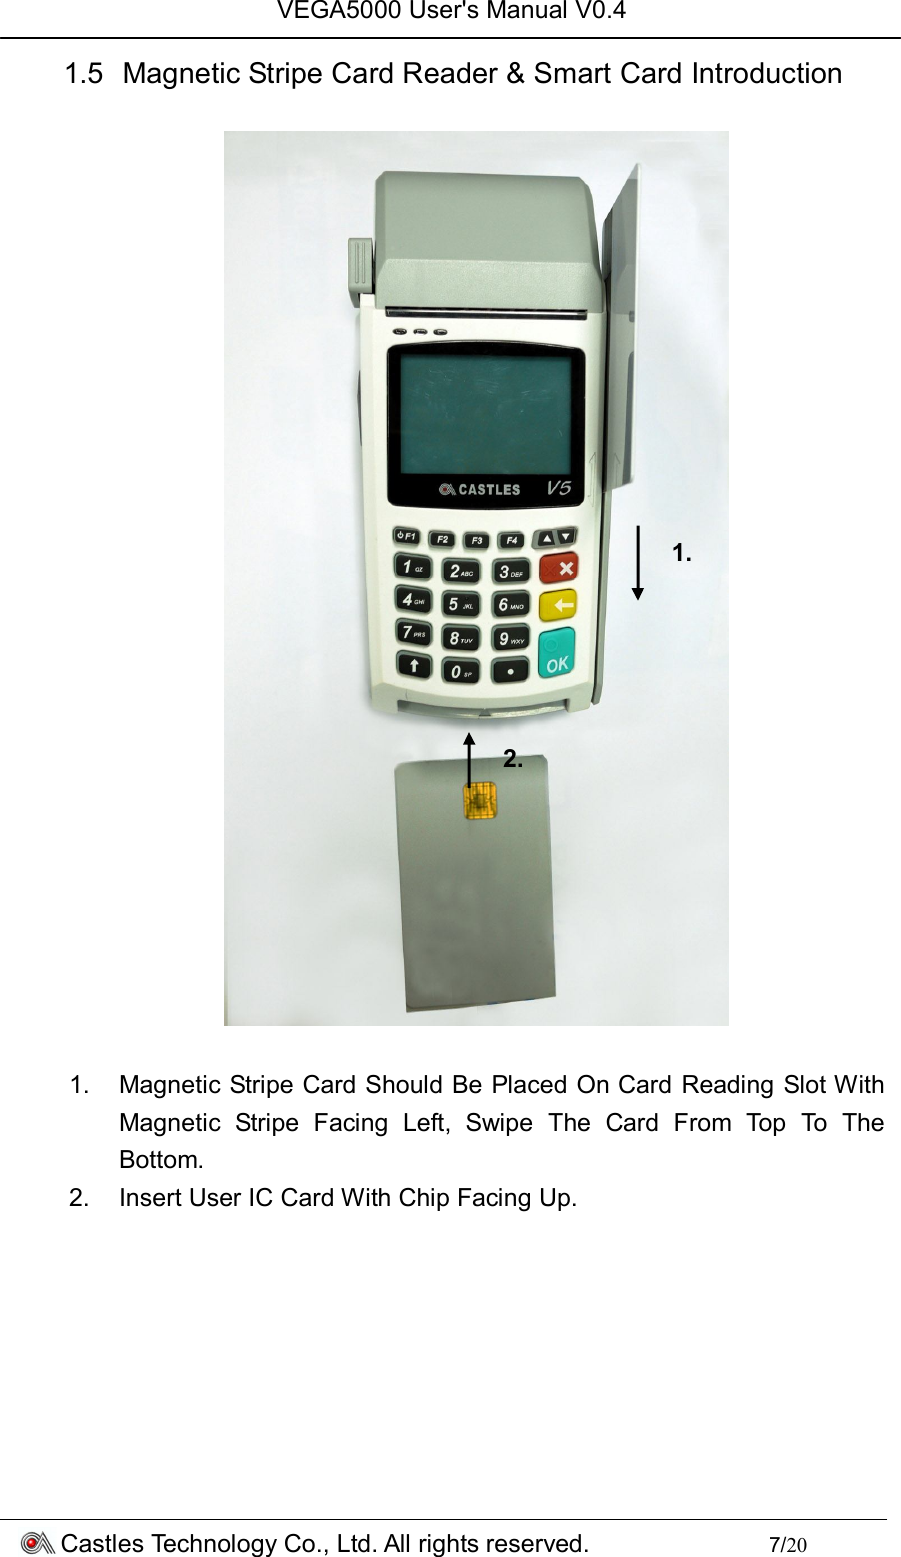 VEGA5000 User&apos;s Manual V0.4 Castles Technology Co., Ltd. All rights reserved.        7/20 1.5  Magnetic Stripe Card Reader &amp; Smart Card Introduction    1.  Magnetic Stripe Card Should Be Placed On Card Reading Slot With Magnetic  Stripe  Facing  Left,  Swipe  The  Card  From  Top  To  The Bottom. 2.  Insert User IC Card With Chip Facing Up.        1. 2. 